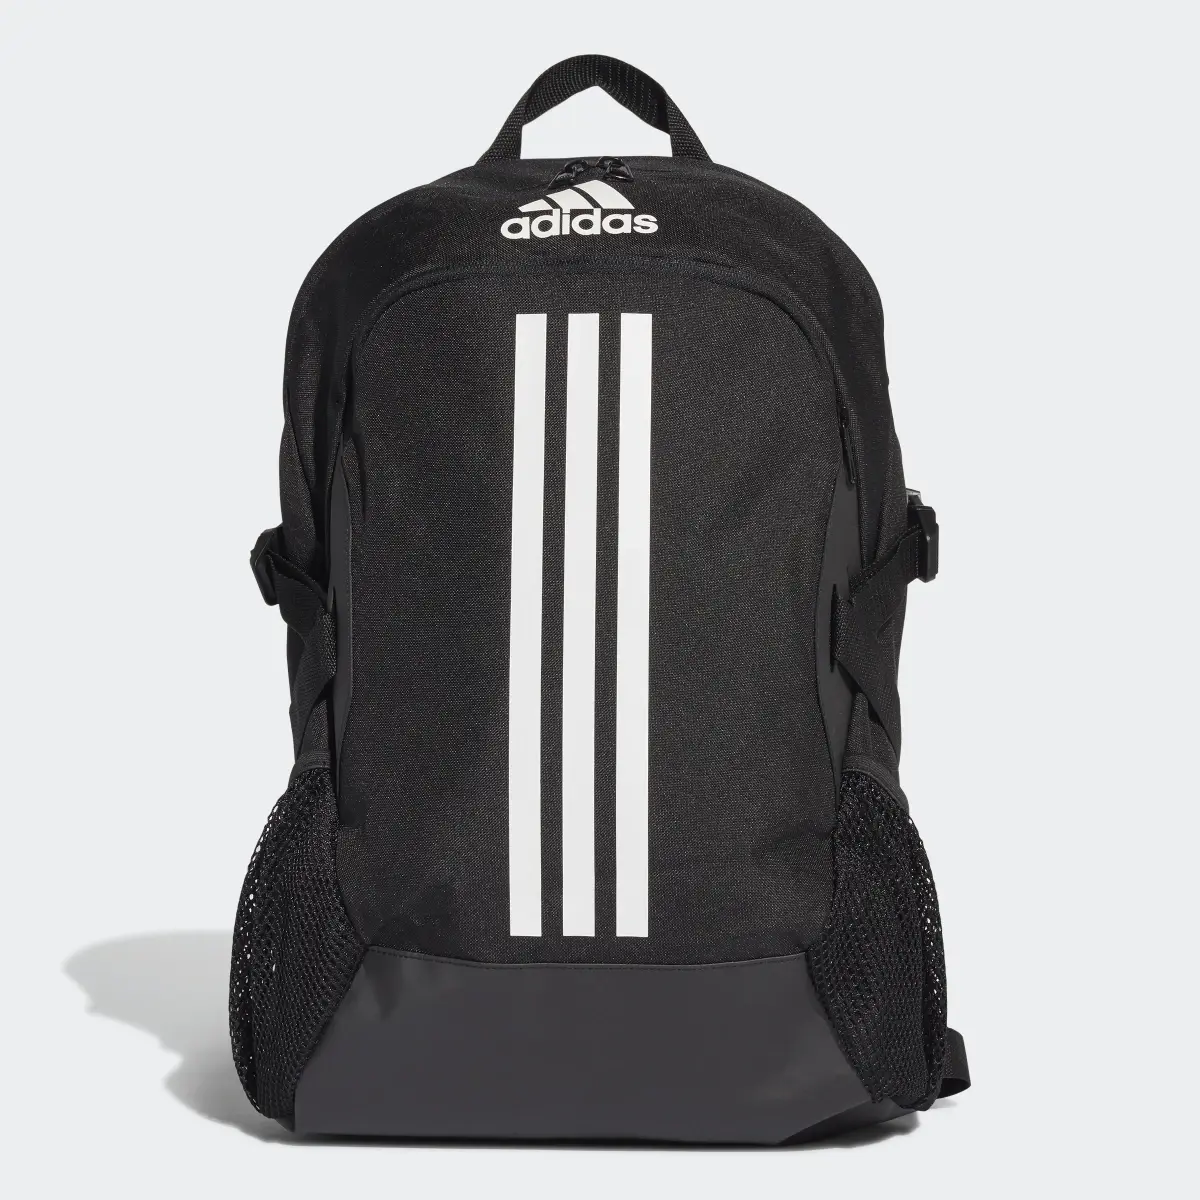 Adidas Power 5 Backpack. 2